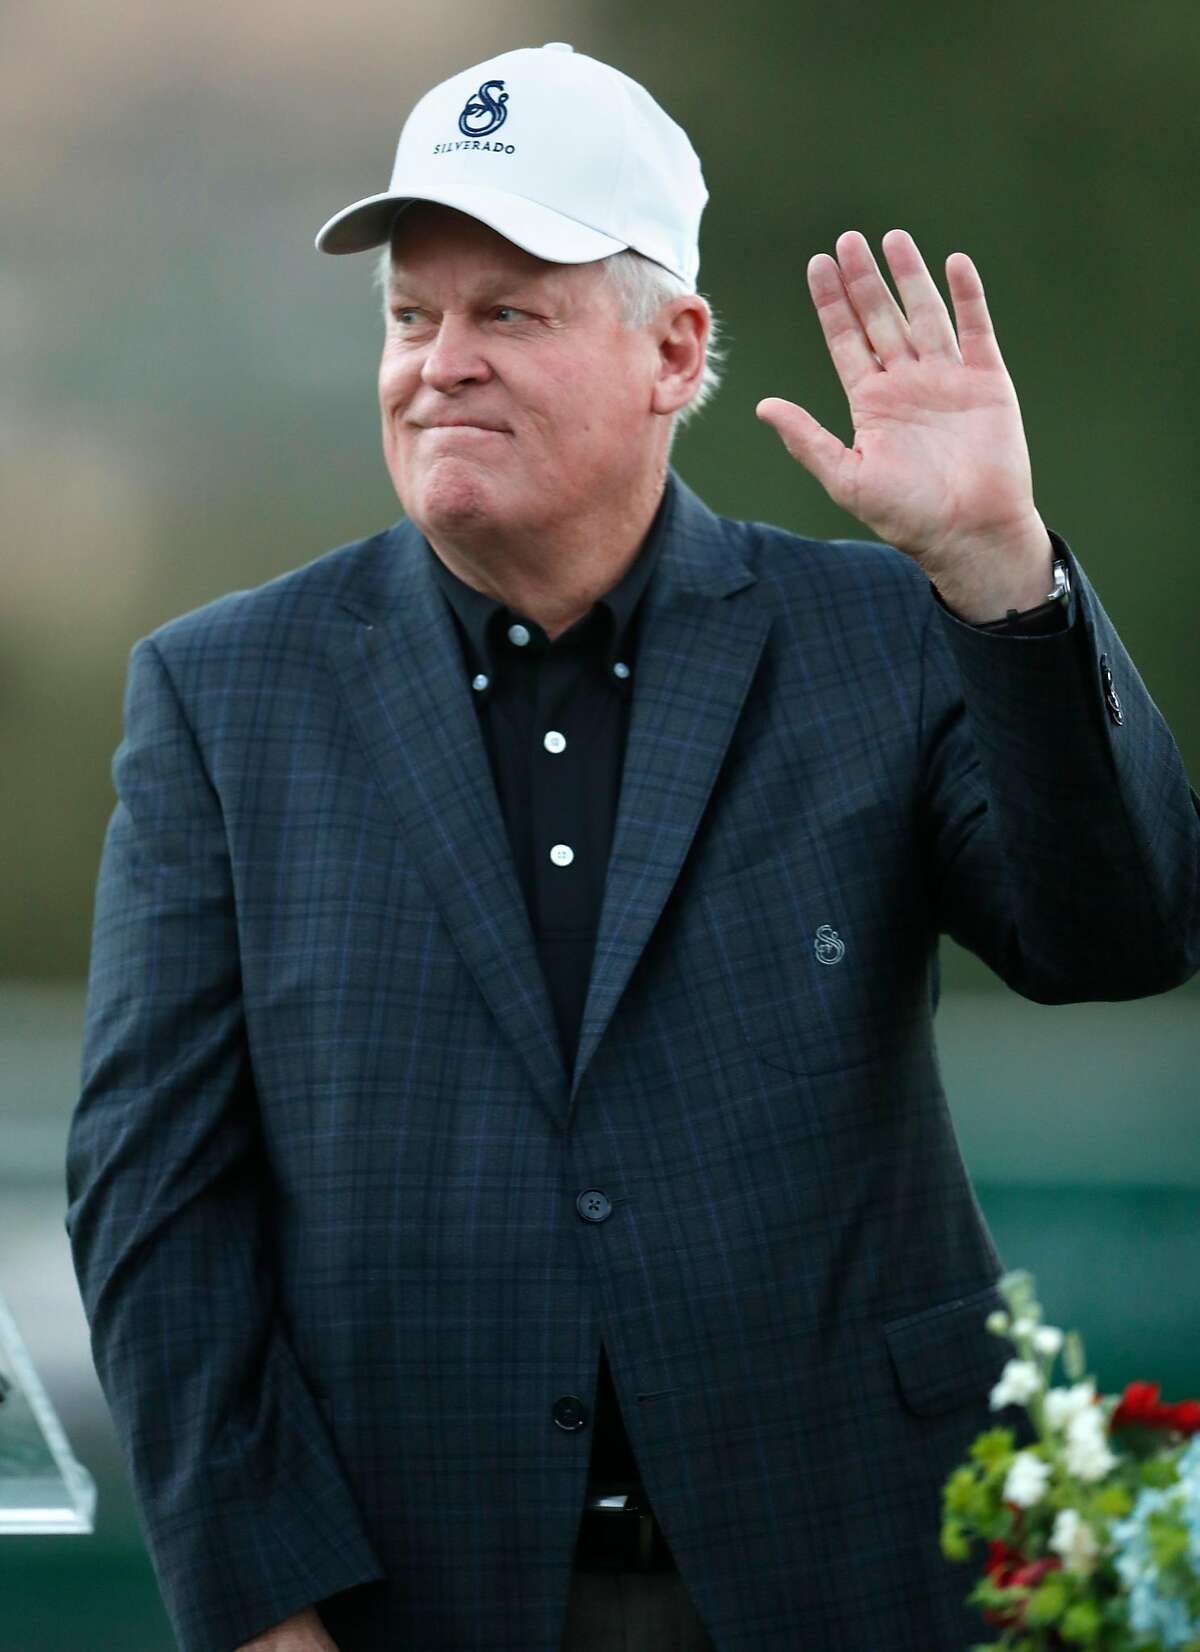 Johnny Miller waves during trophy ceremony during final round of Safeway Open at Silverado Resort in Napa, Calif. on Sunday, October 7, 2018.